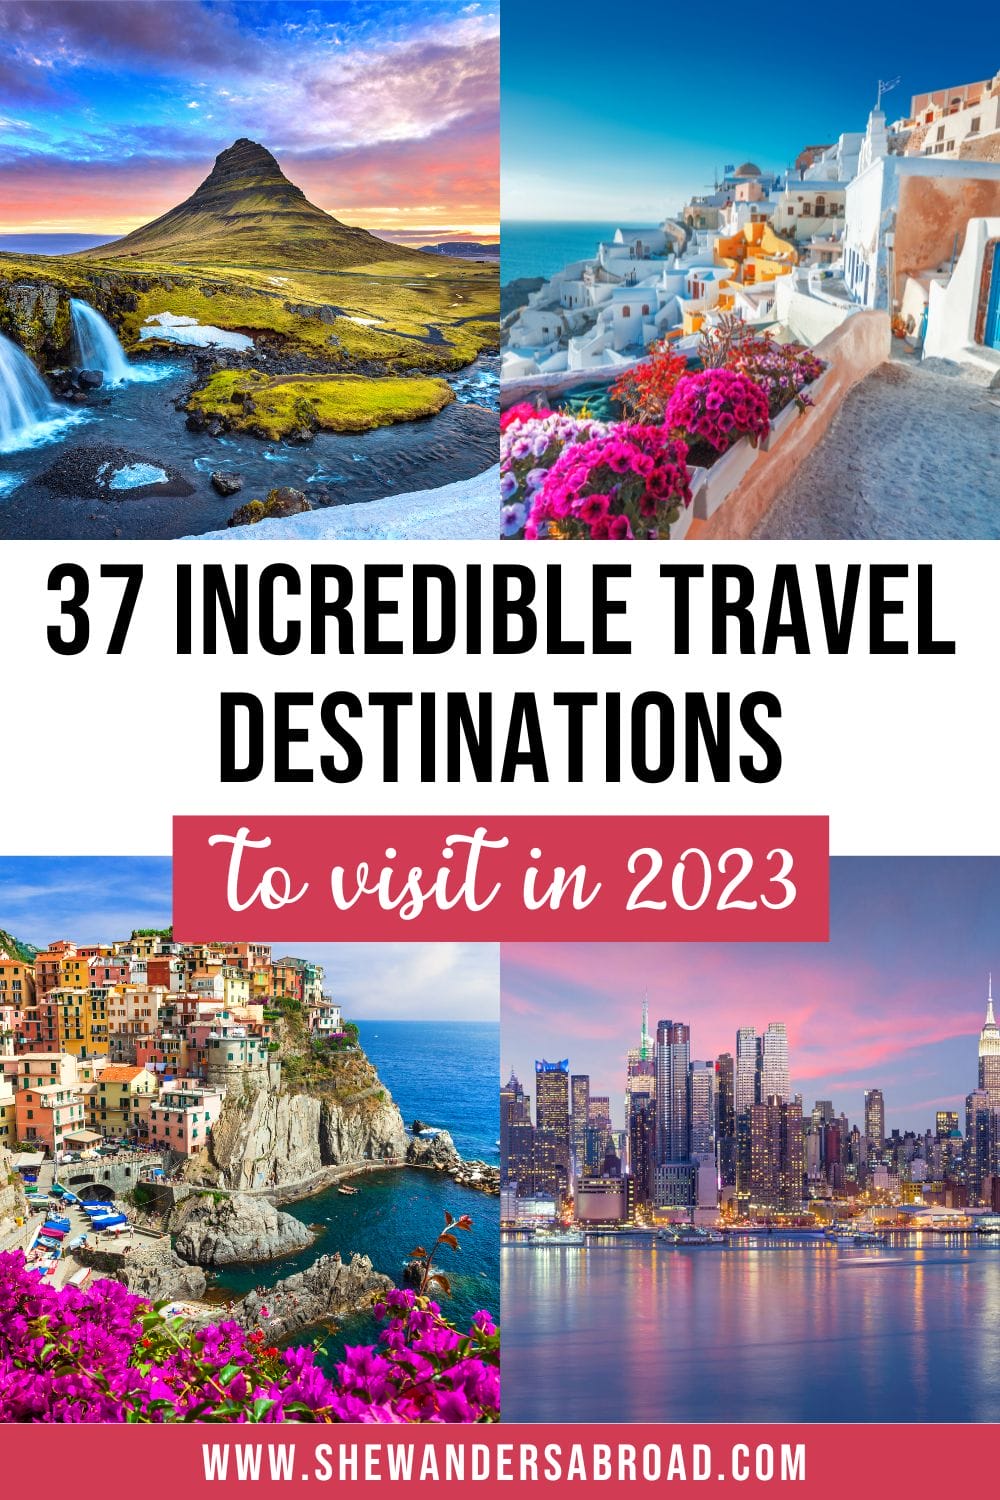 37 Dream Destinations to Add to Your 2022 Travel Bucket List